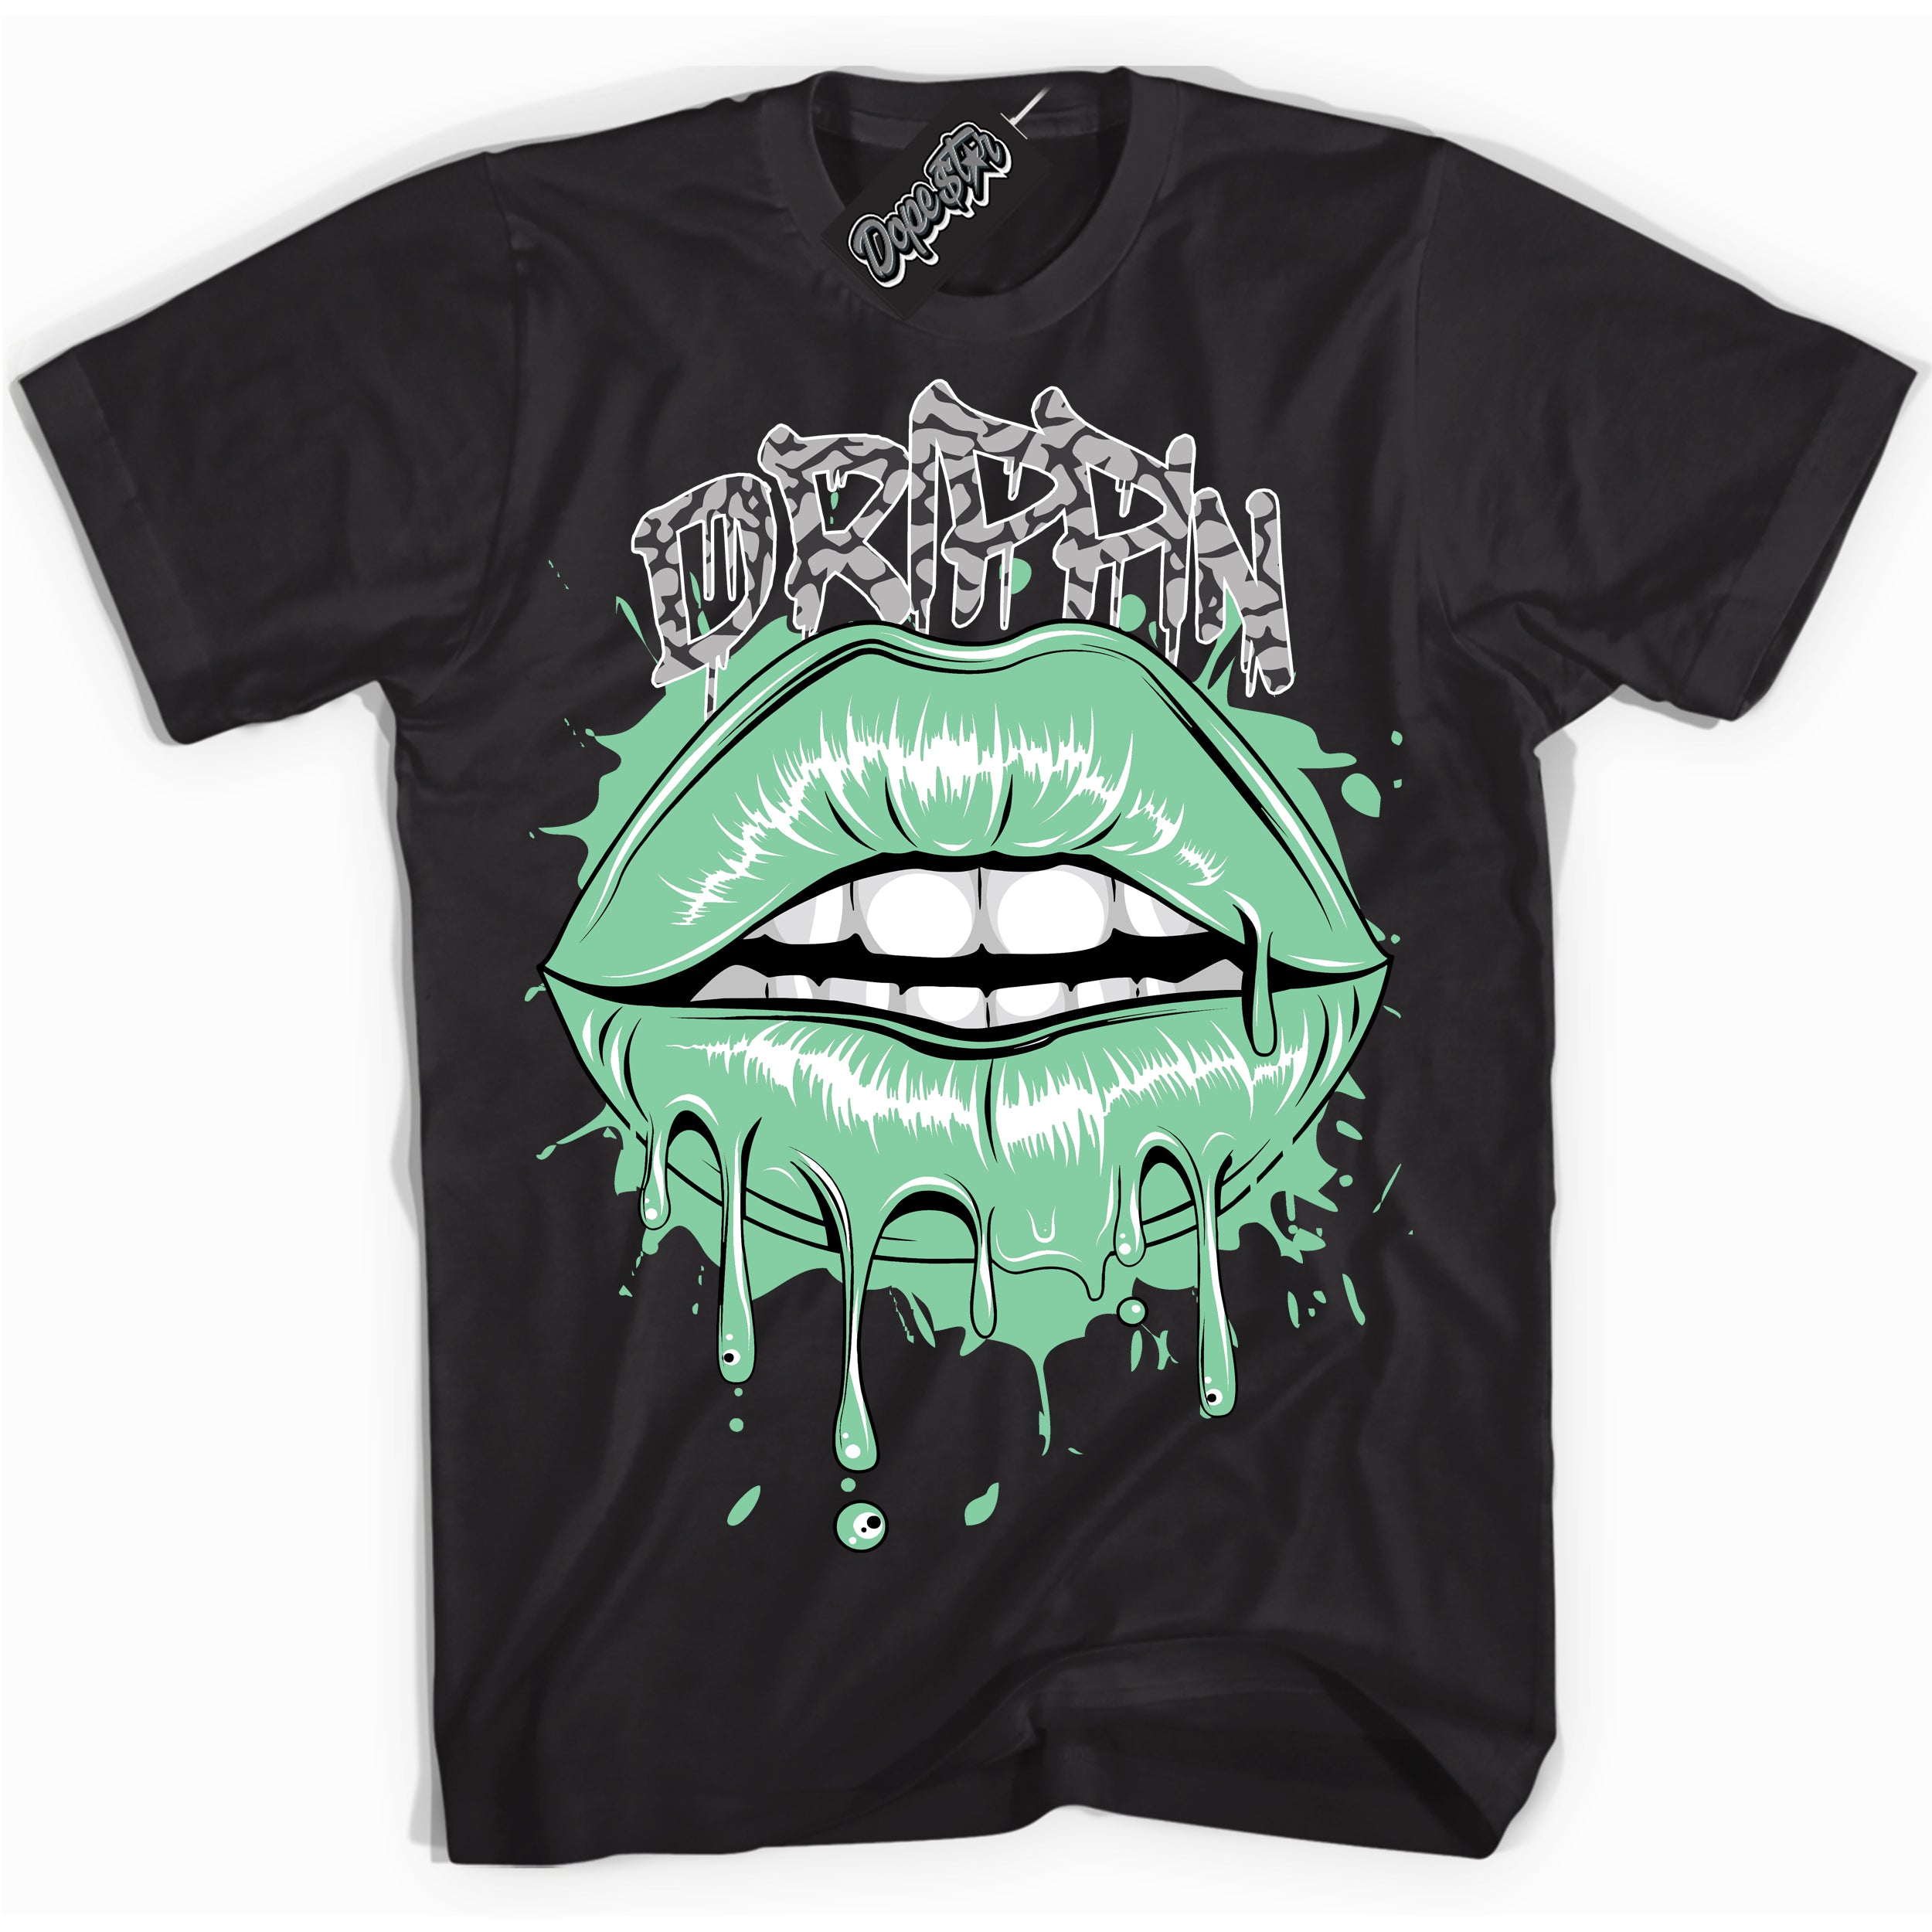 Cool Black graphic tee with “ Drippin ” design, that perfectly matches Green Glow 3s sneakers 